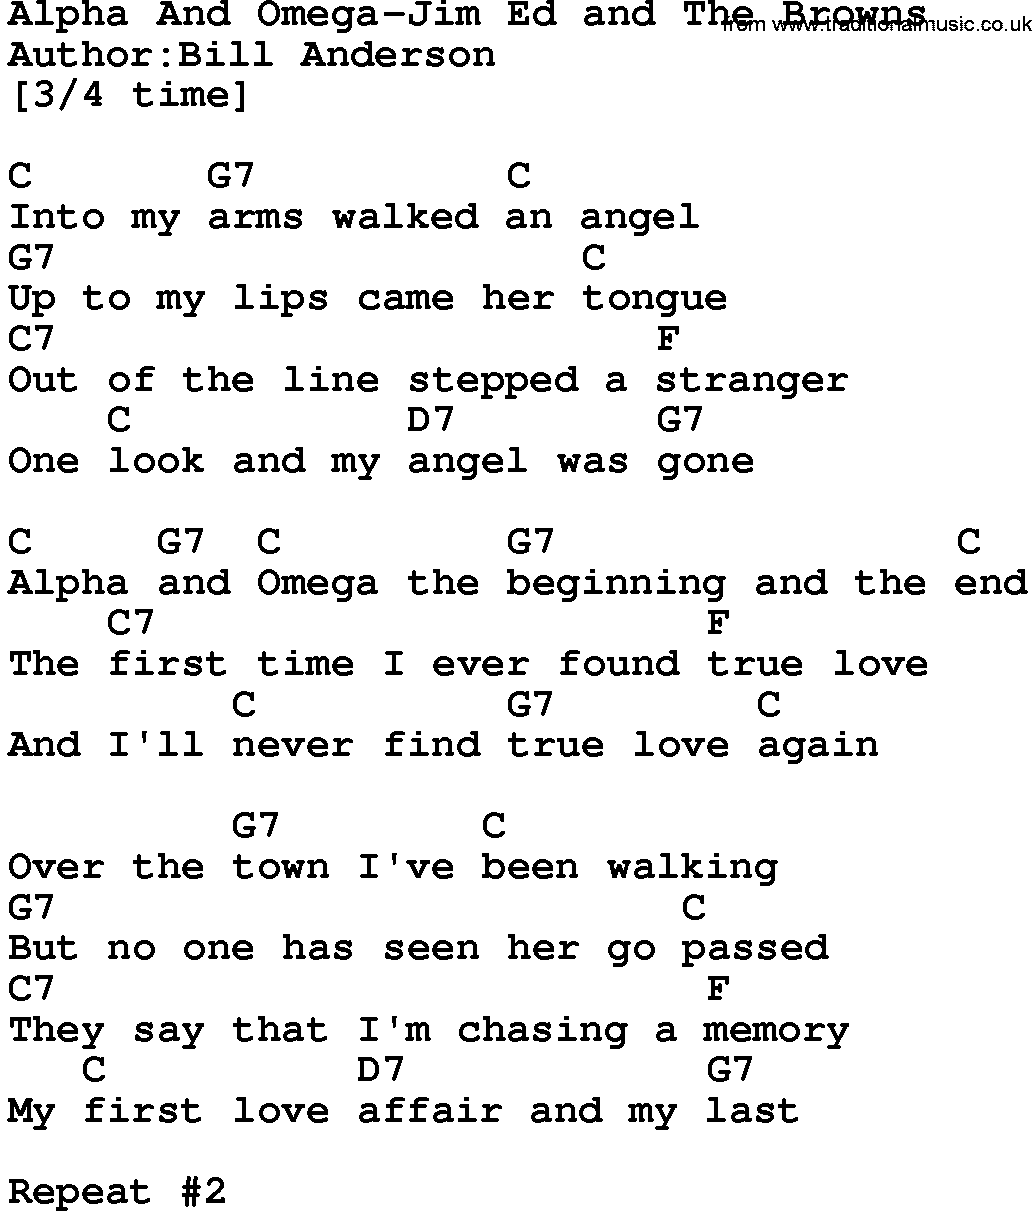 Country music song: Alpha And Omega-Jim Ed And The Browns lyrics and chords